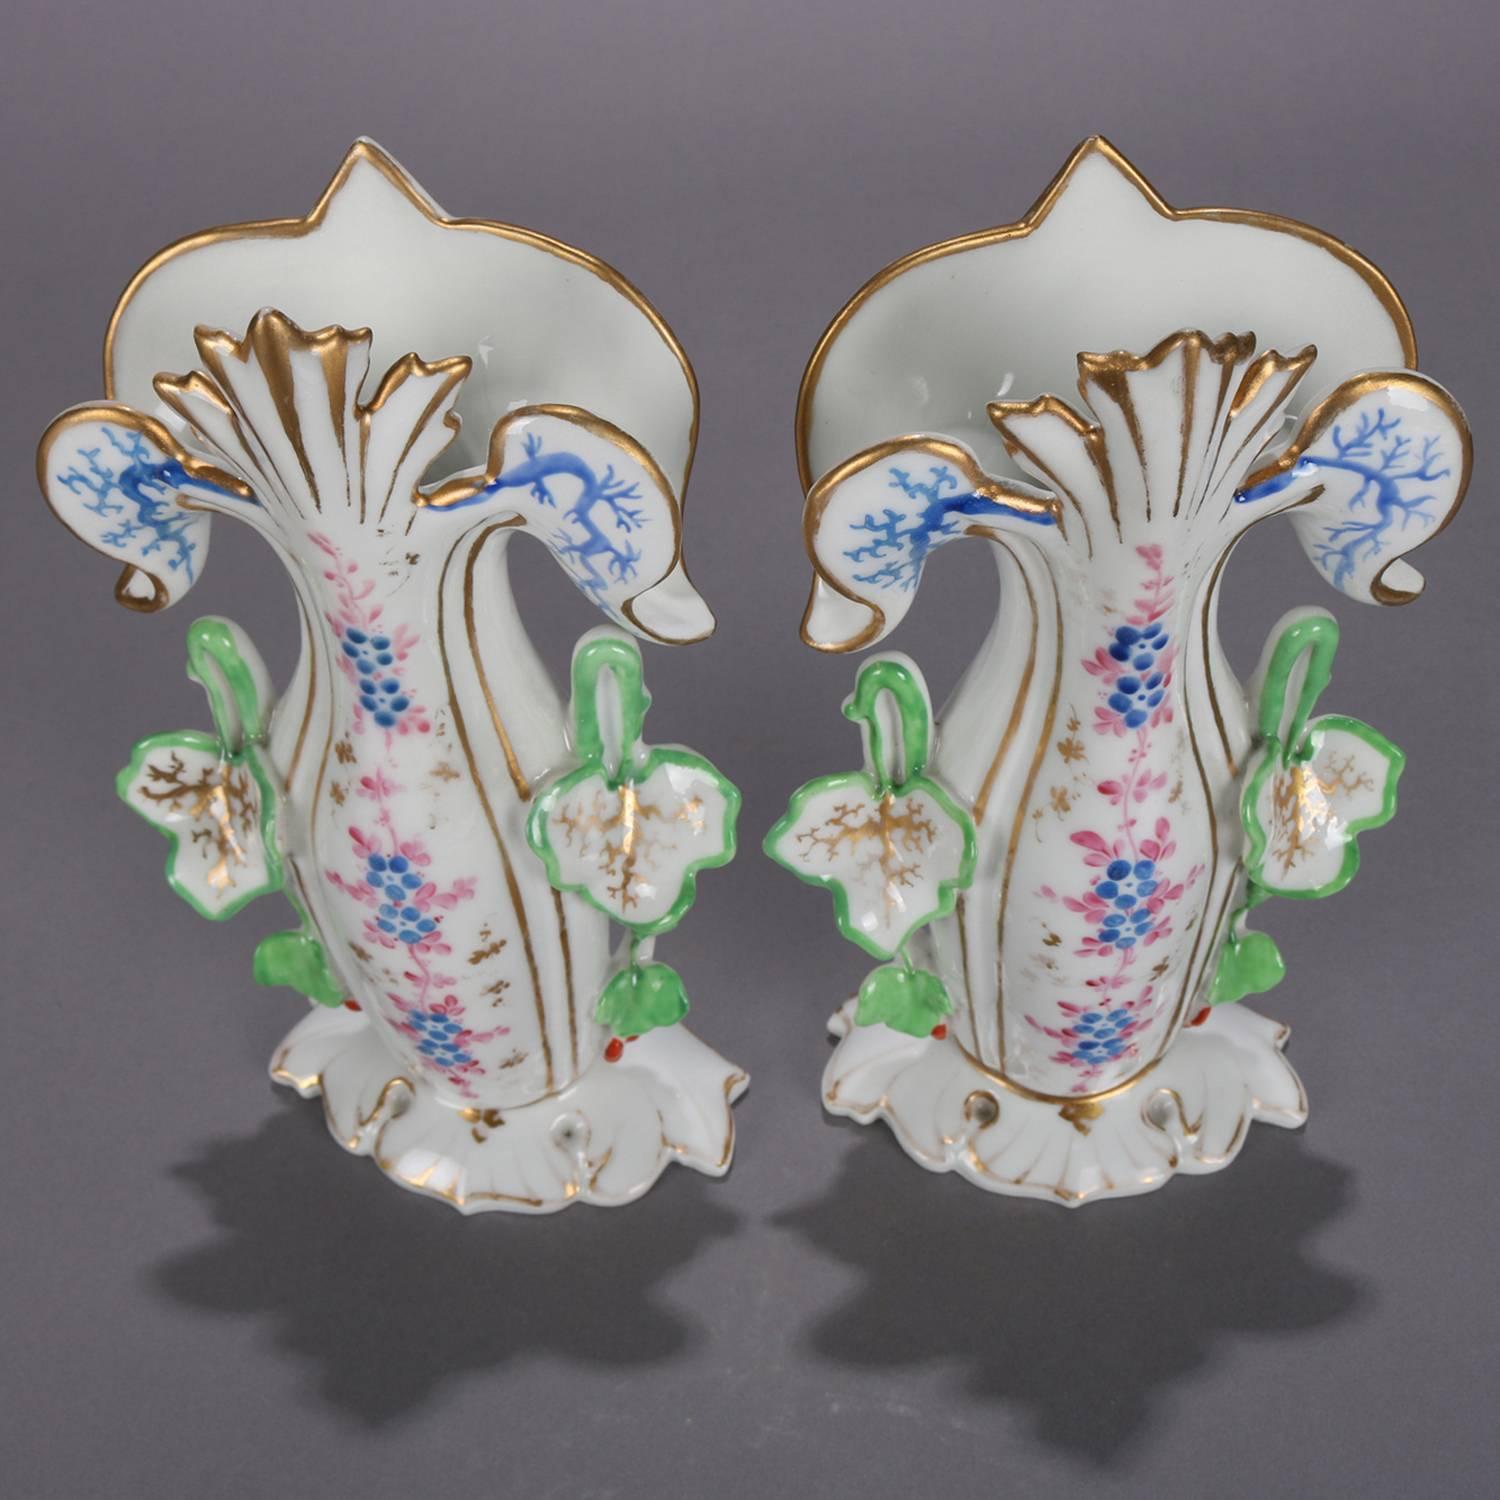 Antique pair of French Old Paris hand-painted porcelain spill vases feature floral form with floral and gilt decoration, circa 1870.

Measure: 9.25